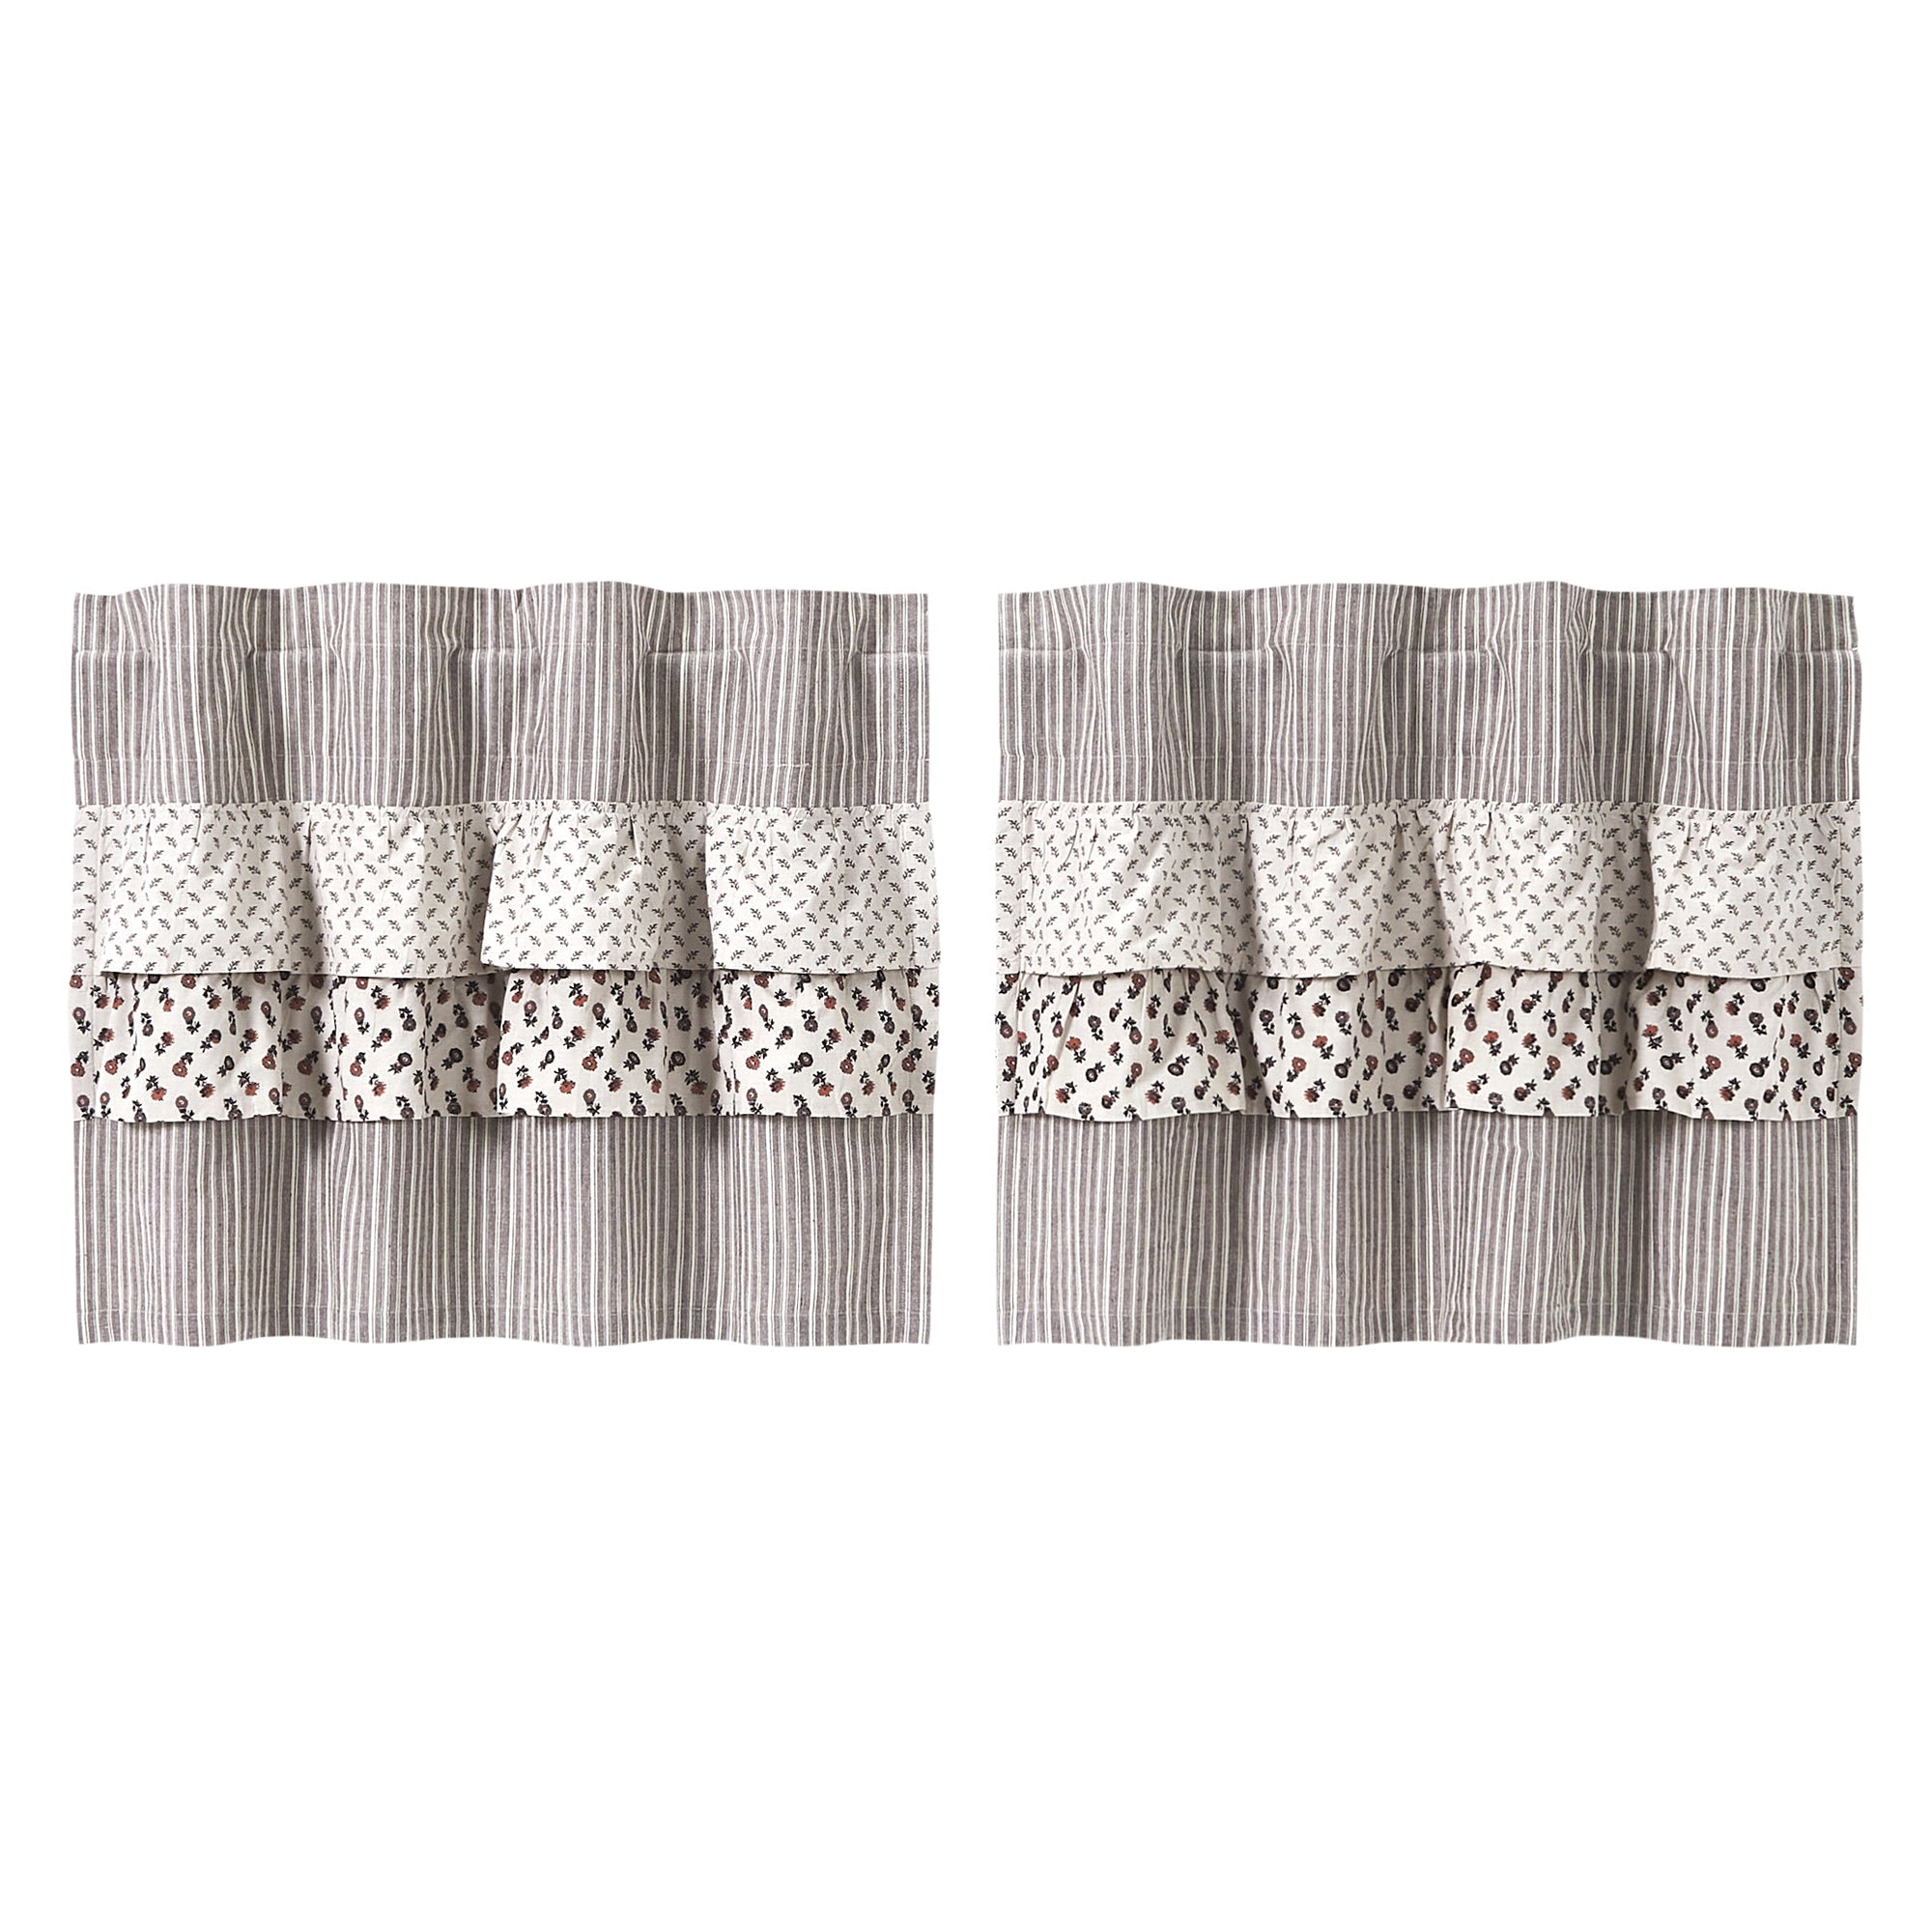 Florette Ruffled Tier Curtain Set of 2 L24xW36 VHC Brands